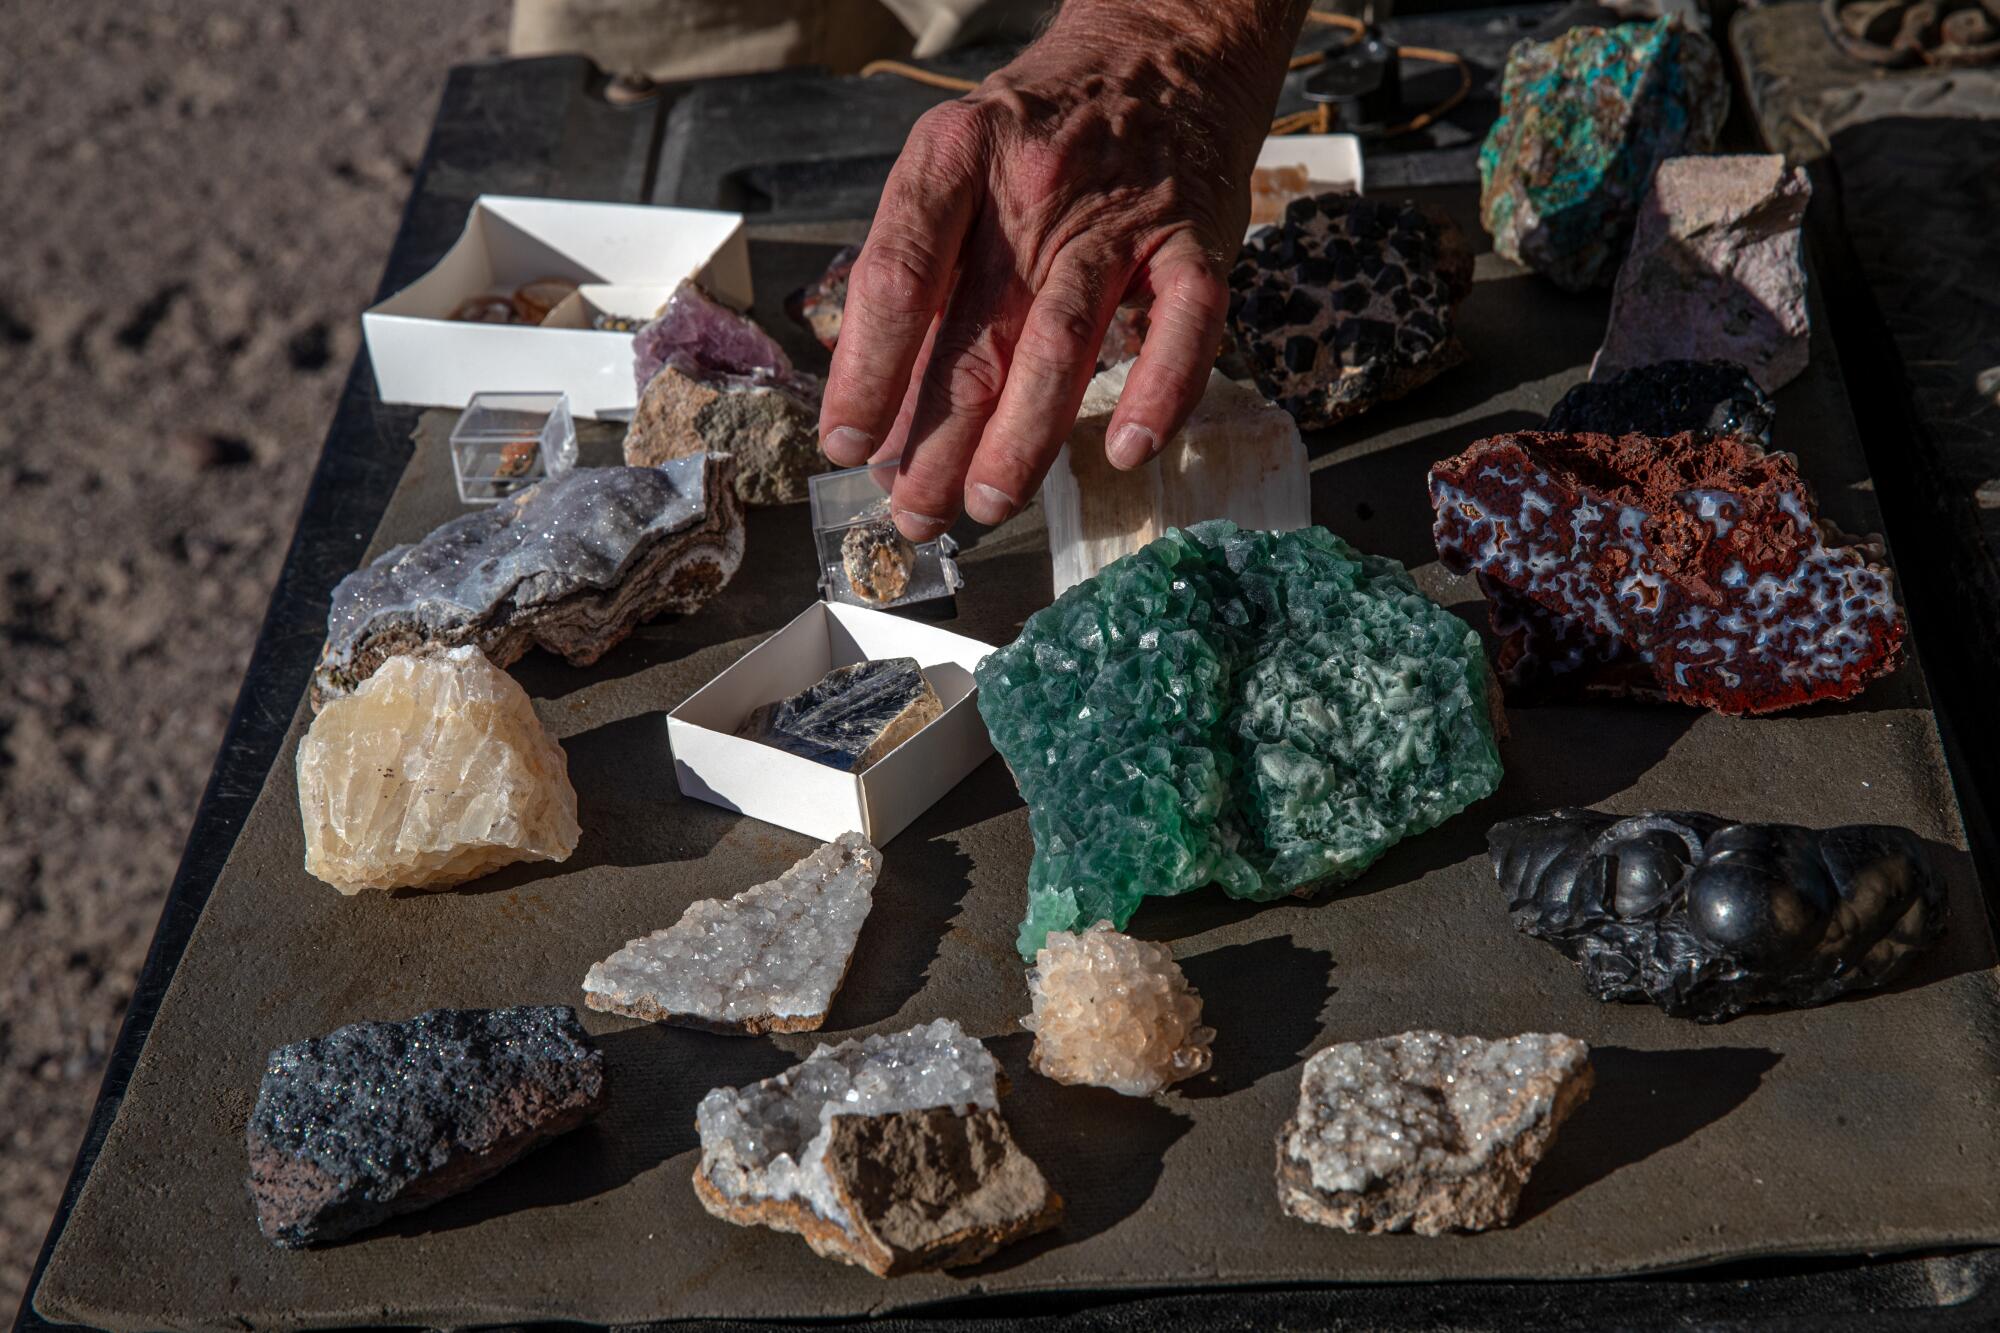  A multicolored assortment of rocks and minerals are arranged on a mat as a hand holds one of the specimens.